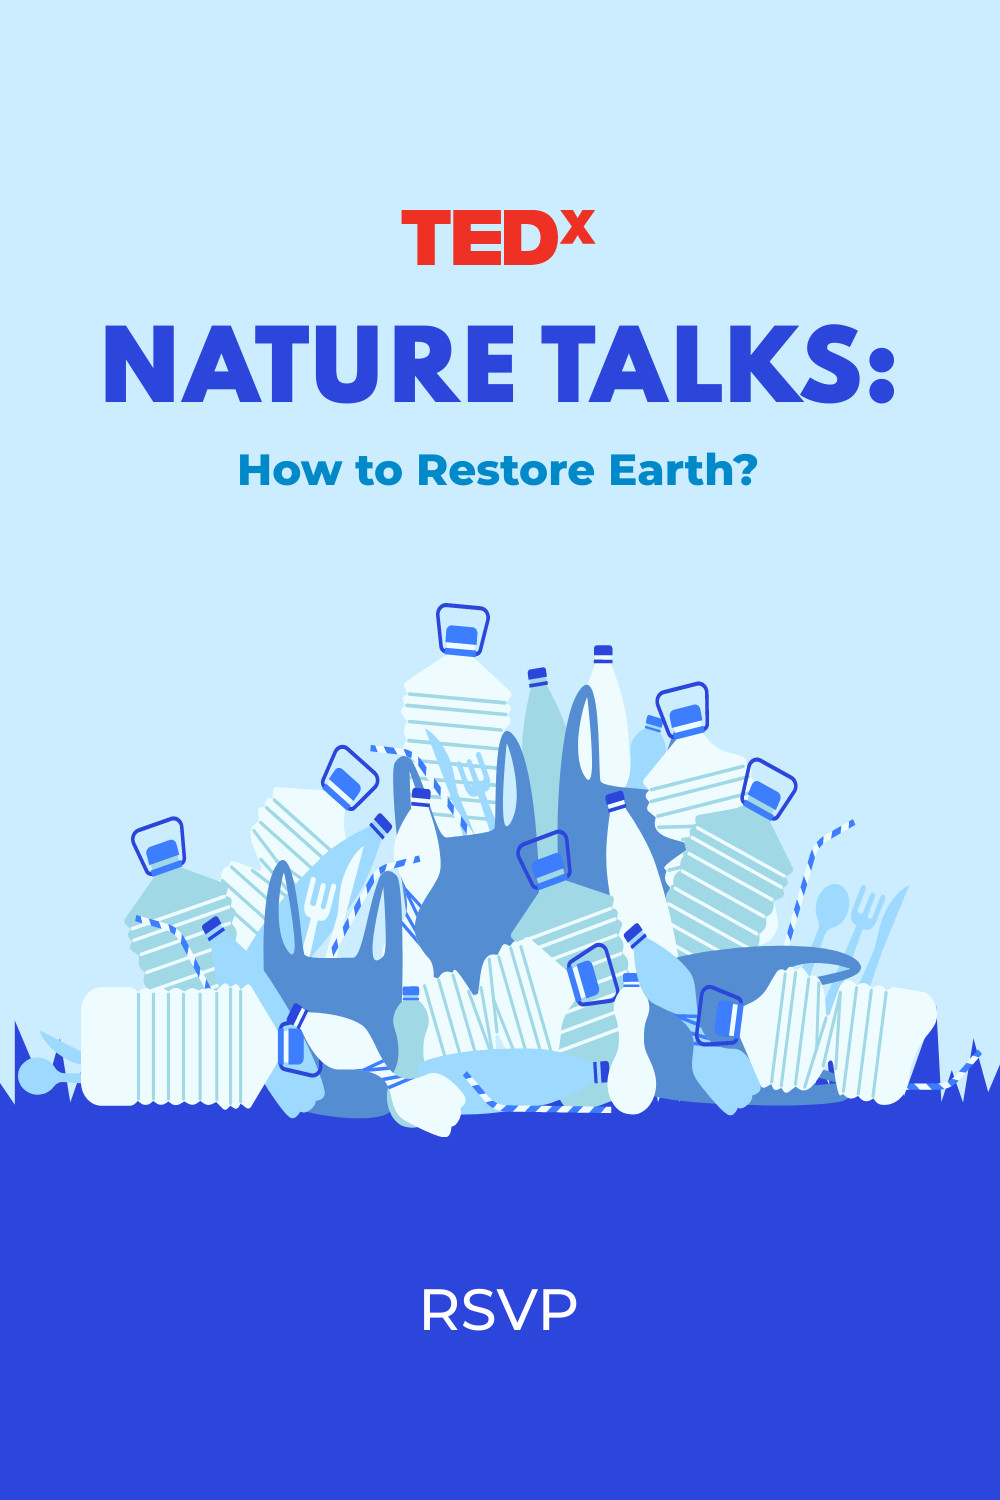 How to Restore Earth Talk Event